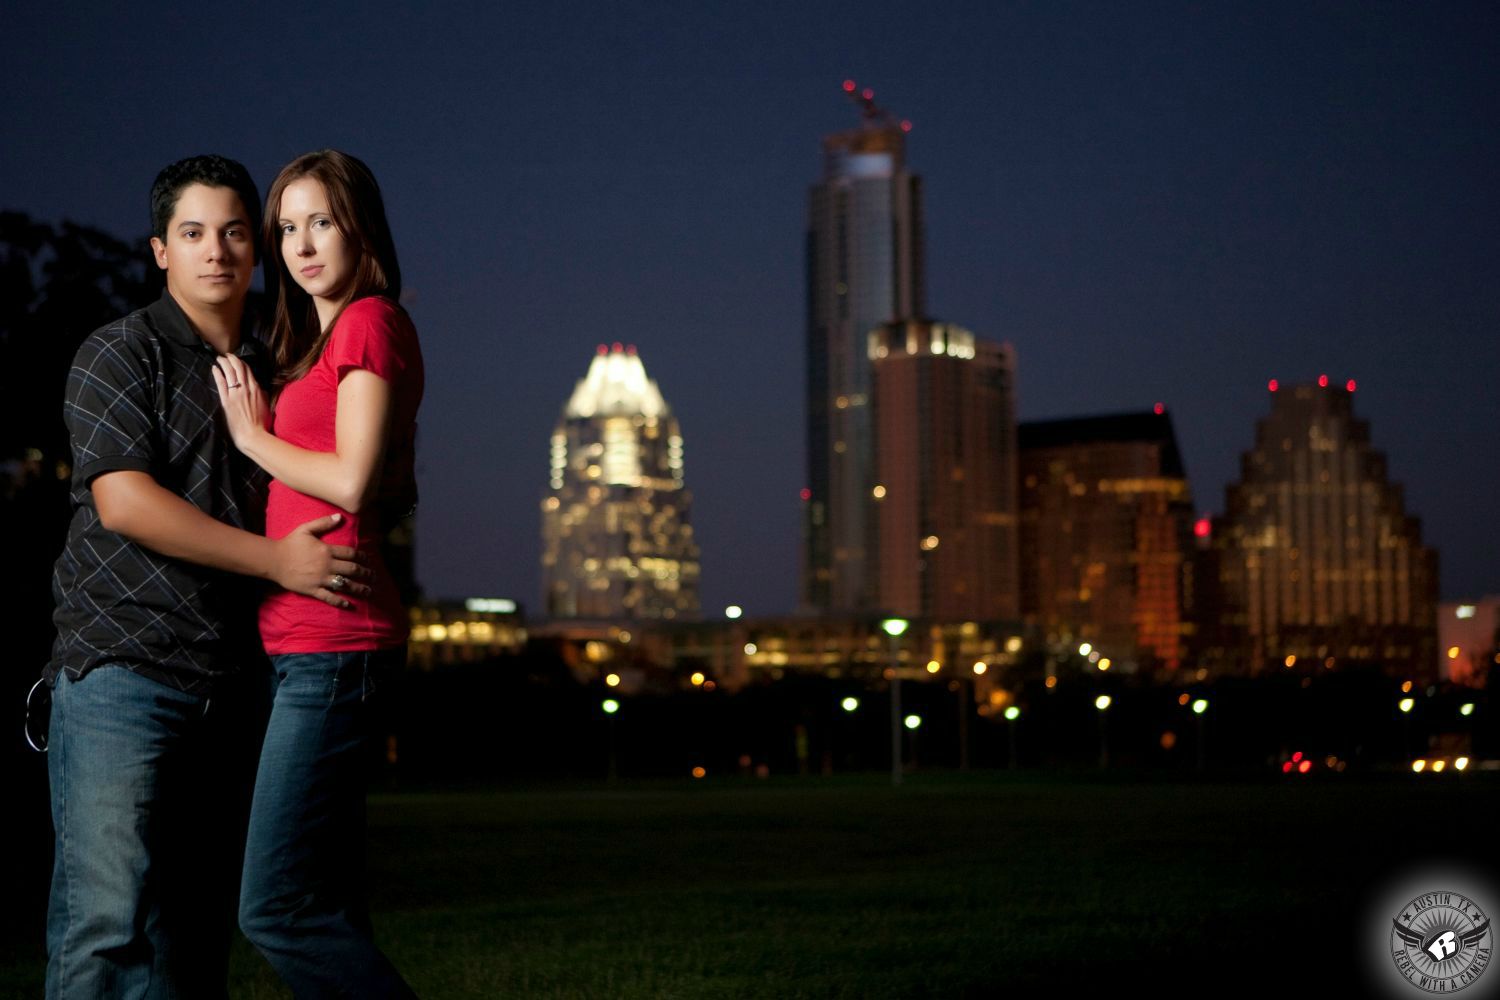 Ginger hair, stoic fair skinned girl in a red low cut blouse and blue jeans stands with her on hand on the chest of a Latino dark haired guy with a navy blue collared crosshatch pattern  shirt and blue jeans at Butler Park in front of the Austin city skyline at night in this vivid engagement image near The Long Center!  